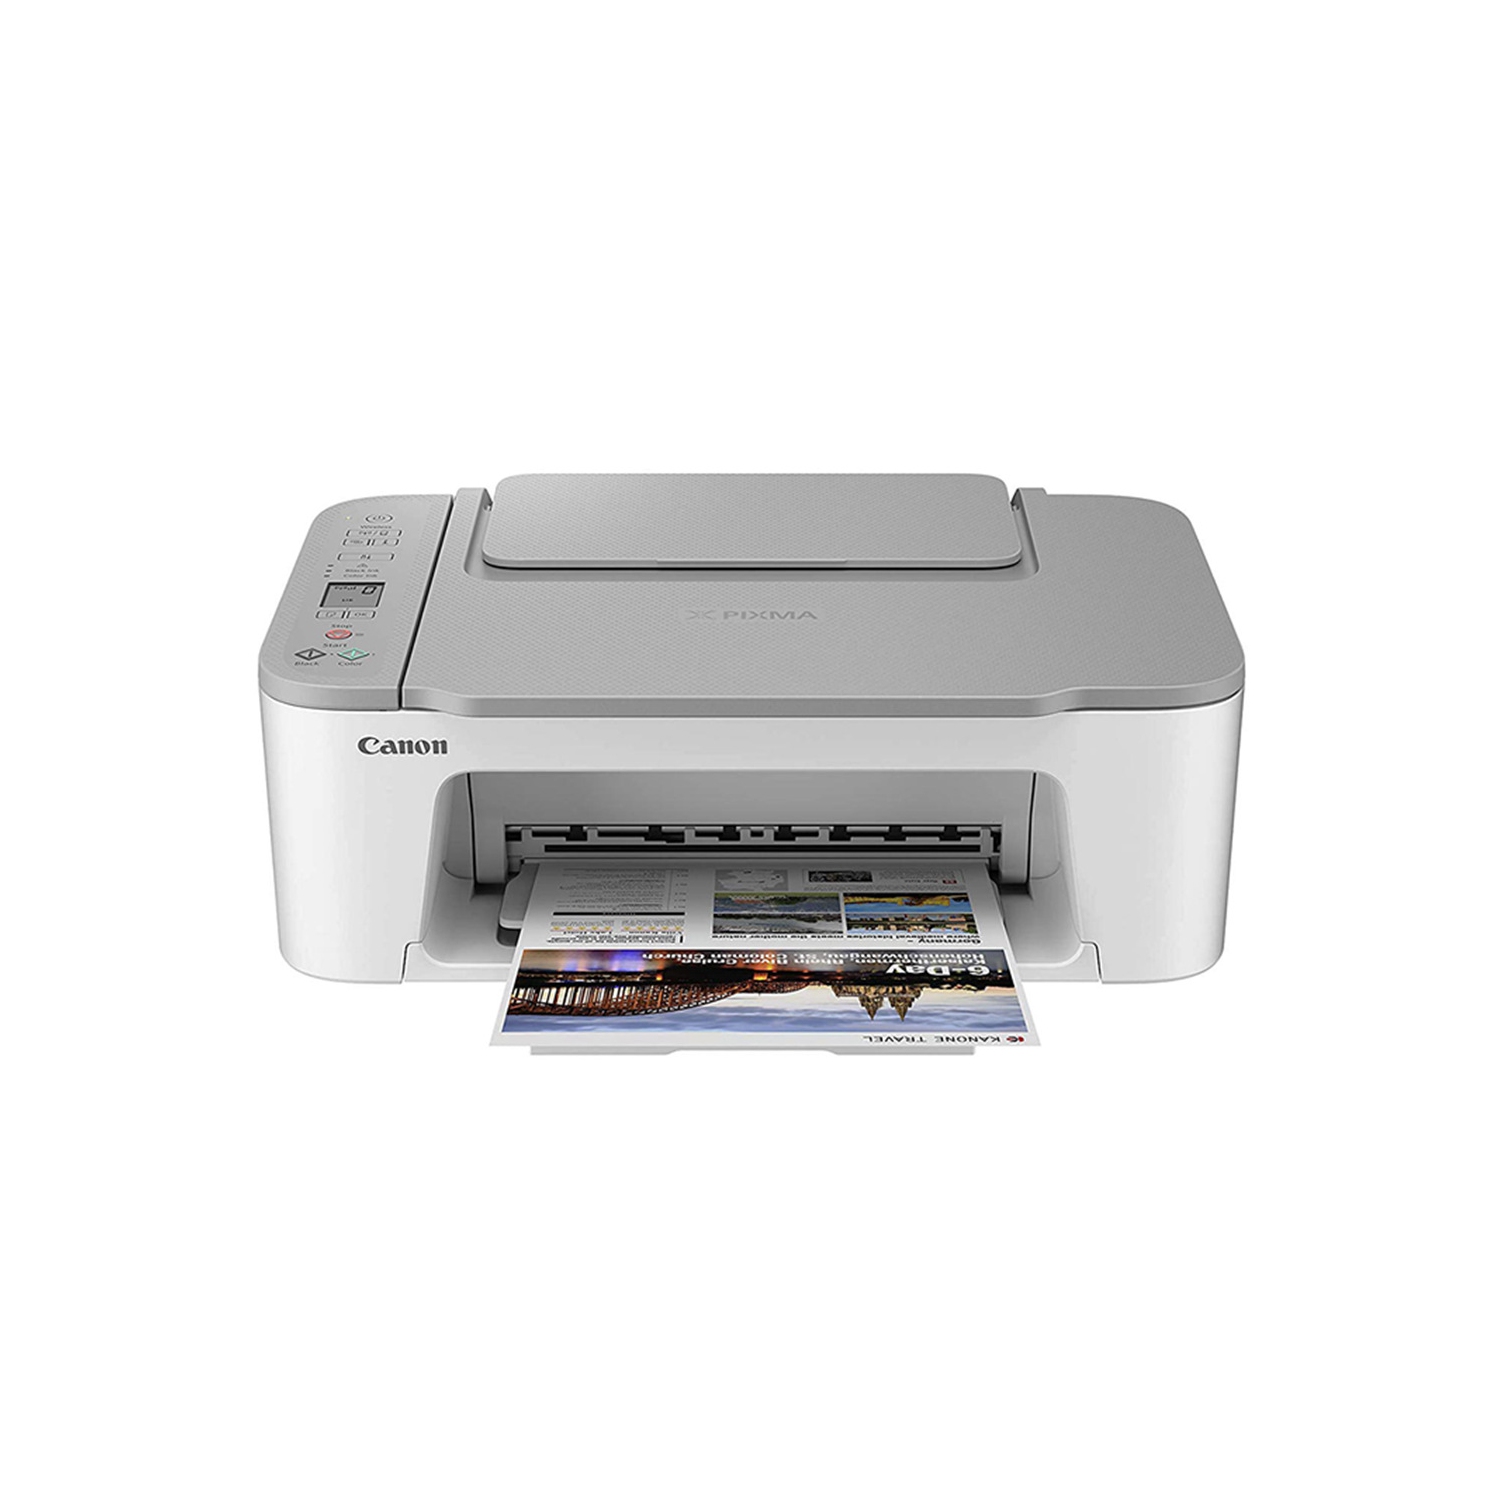 For Canon PIXMA TS3420 Wireless Colour Inkjet Printer (4463C003) with Printing Copying and Scanning For Home Office Use - White